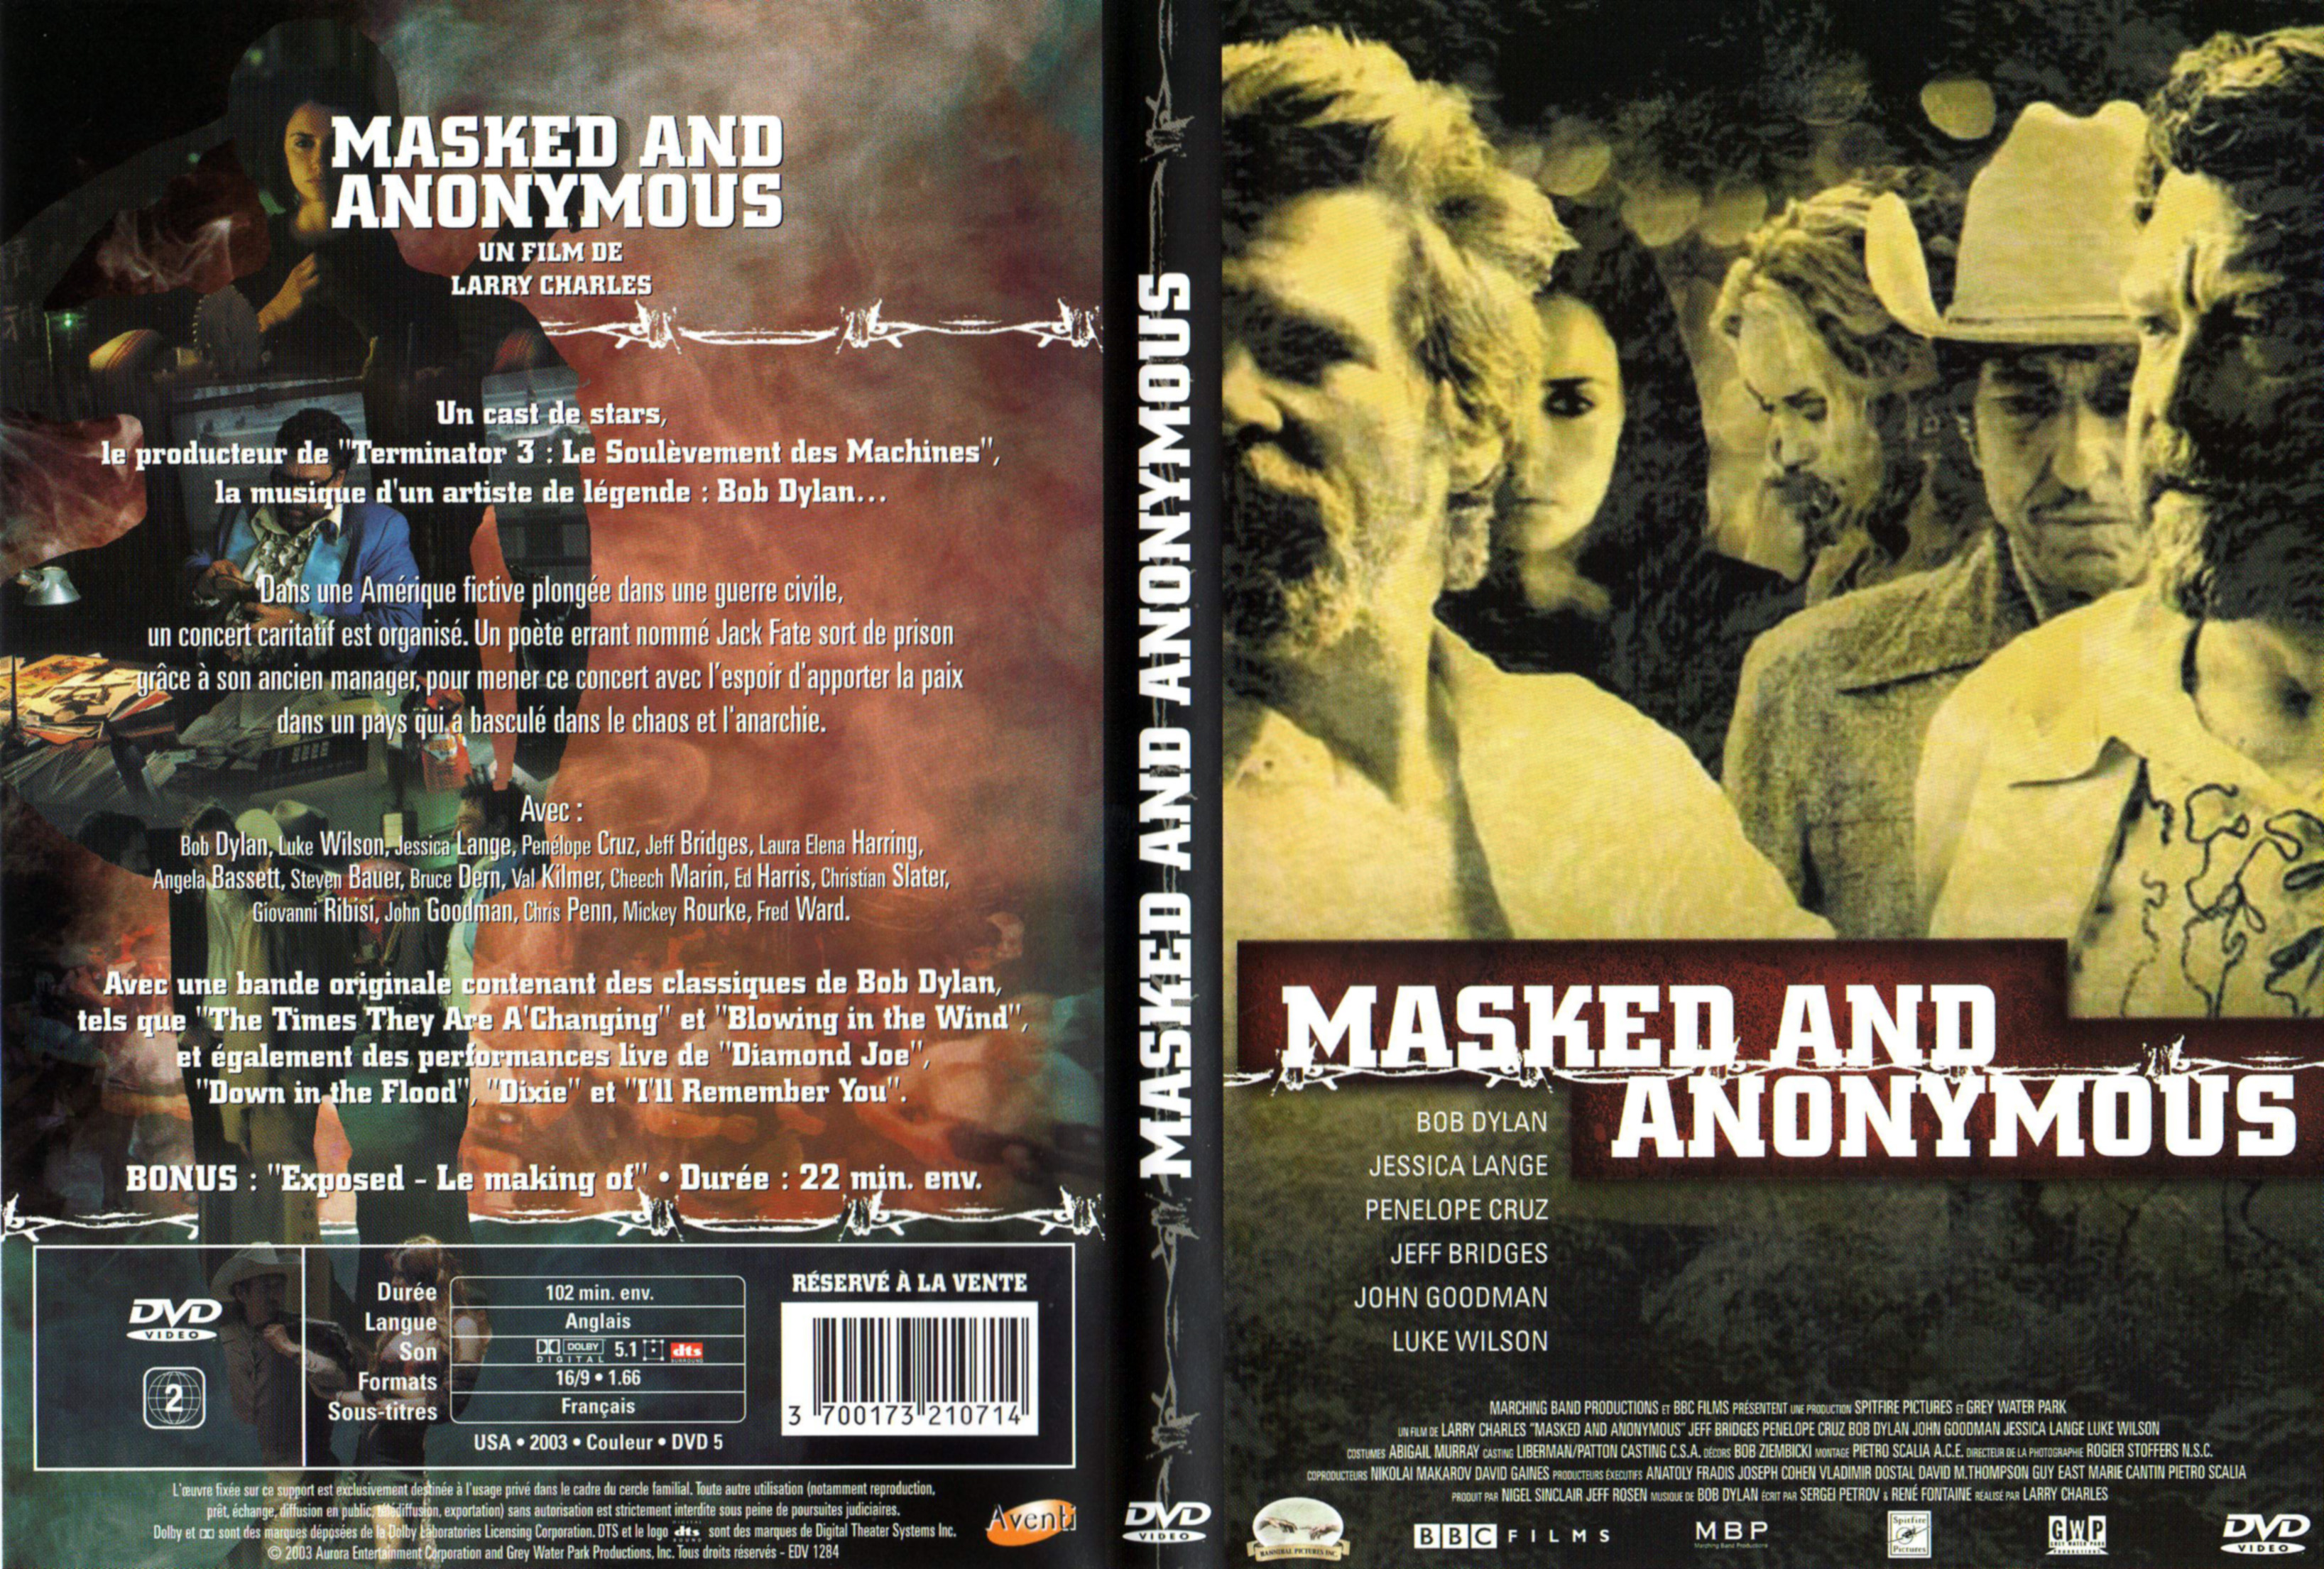 Jaquette DVD Masked and anonymous